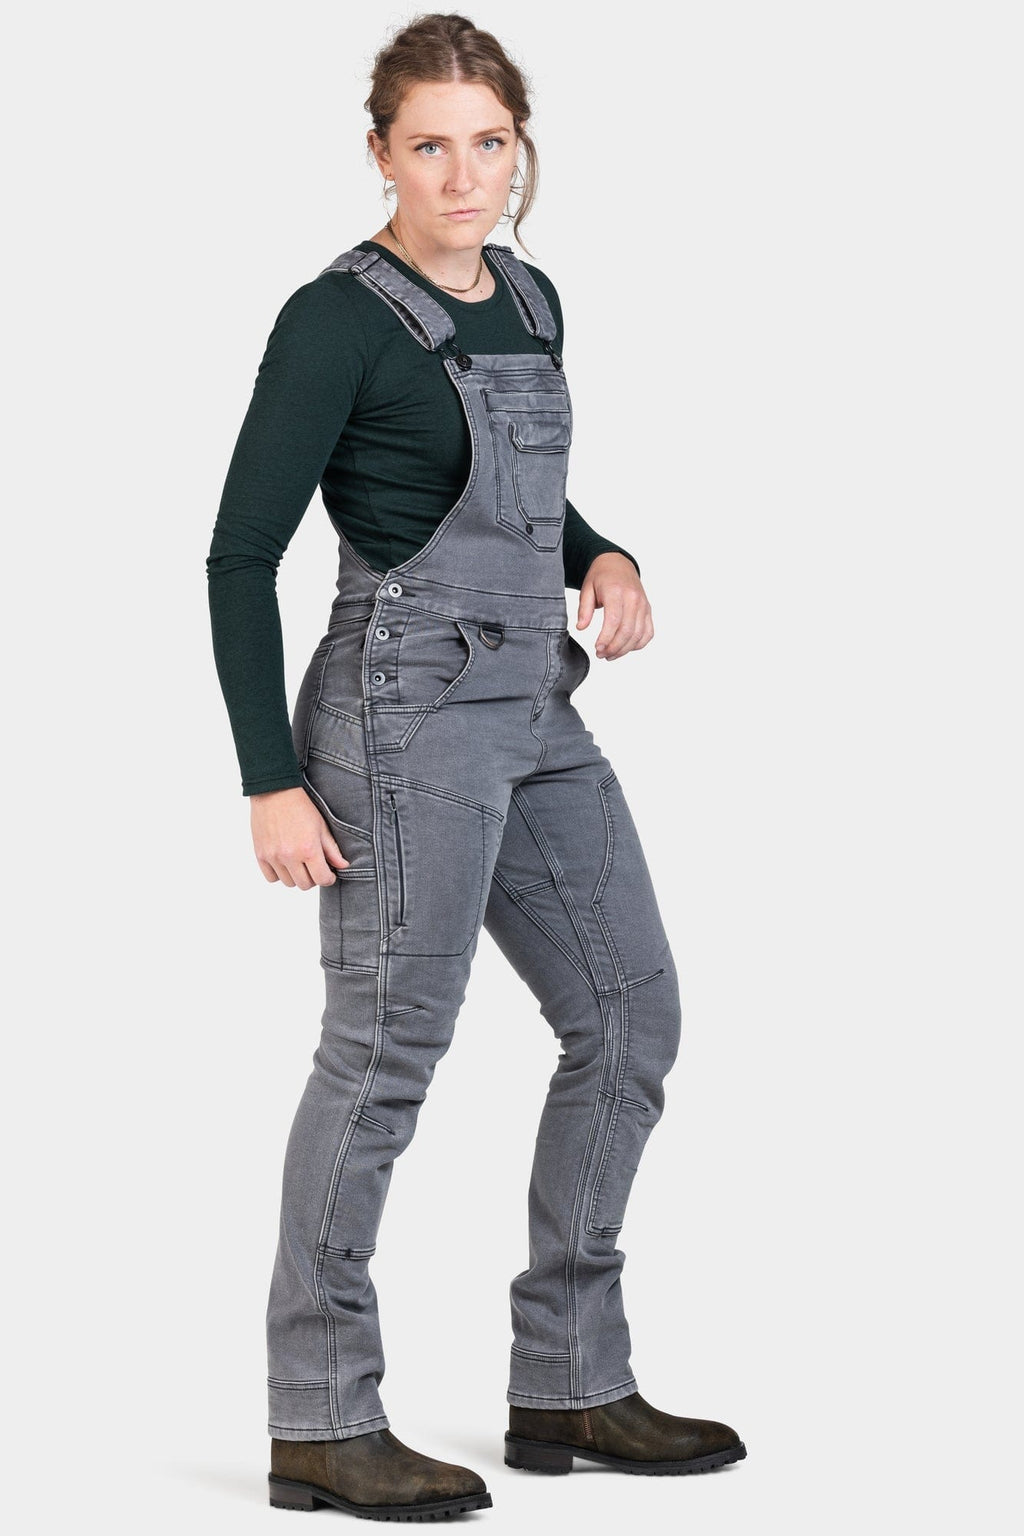 Dovetail Workwear Women's Day Construct Pant - Work World